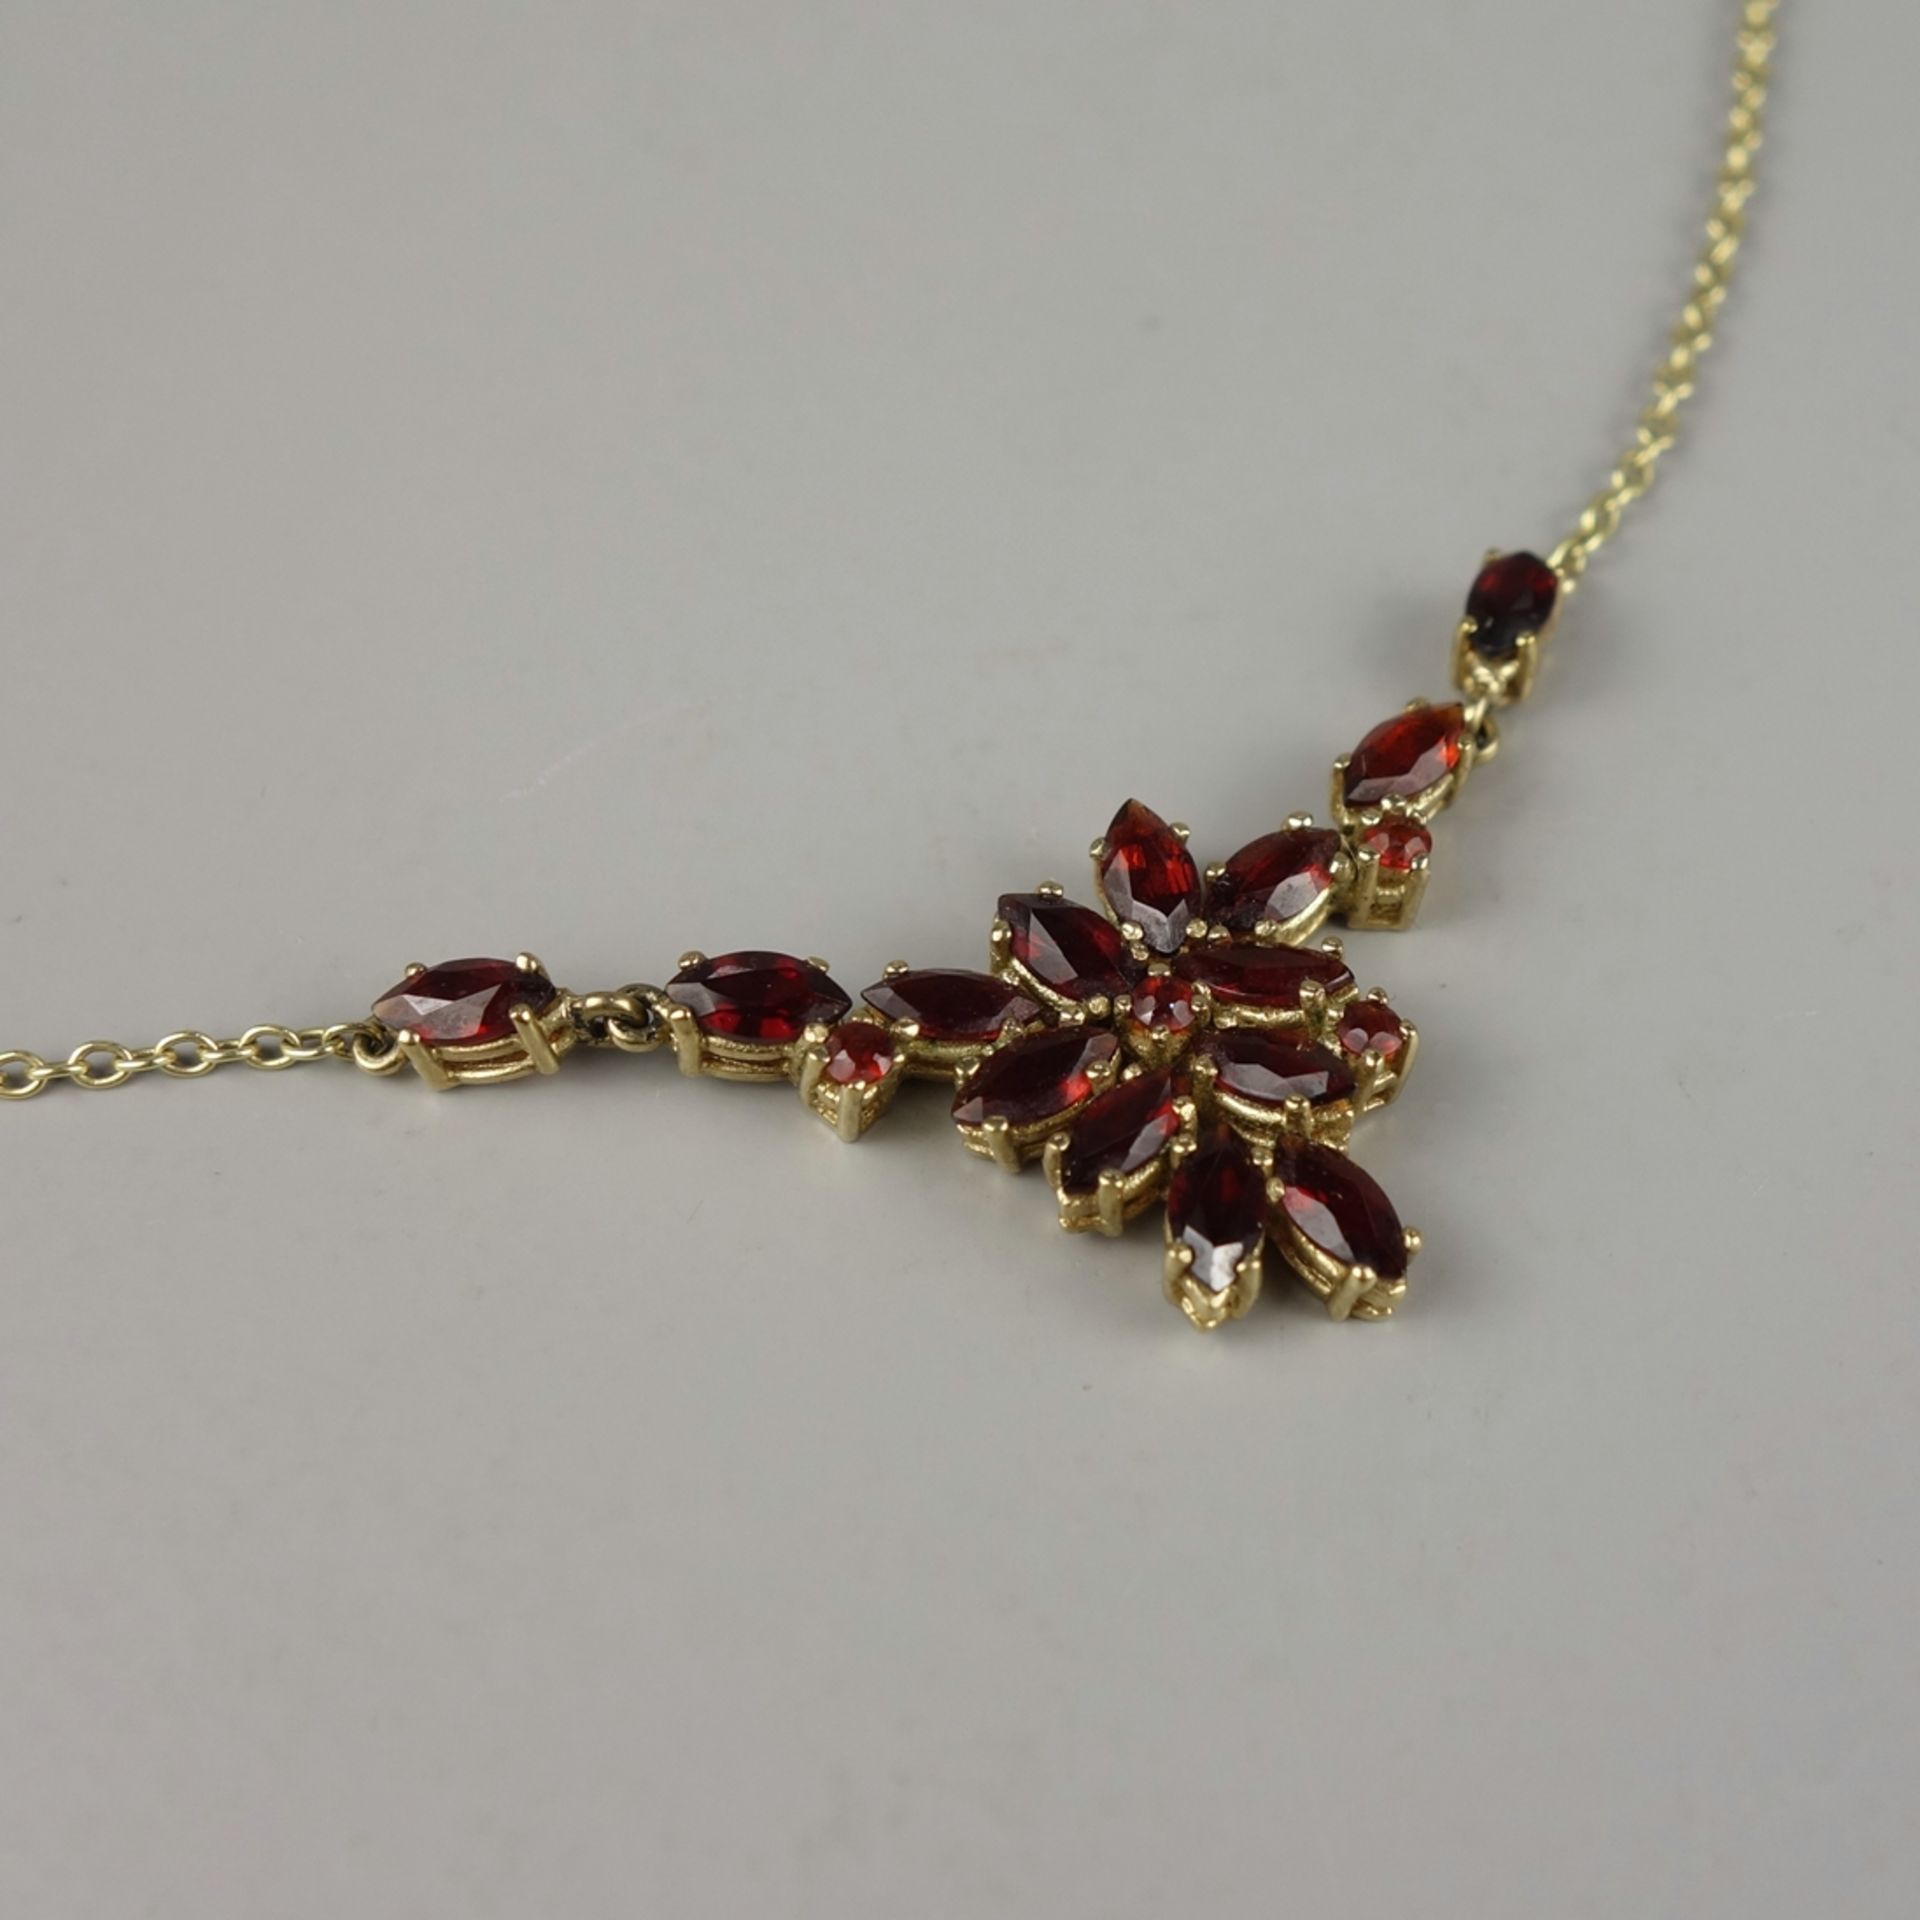 Garnet necklace, 8K gold, weight 5,88g, flower shaped middle part, anchor chain, l.approx.43cm